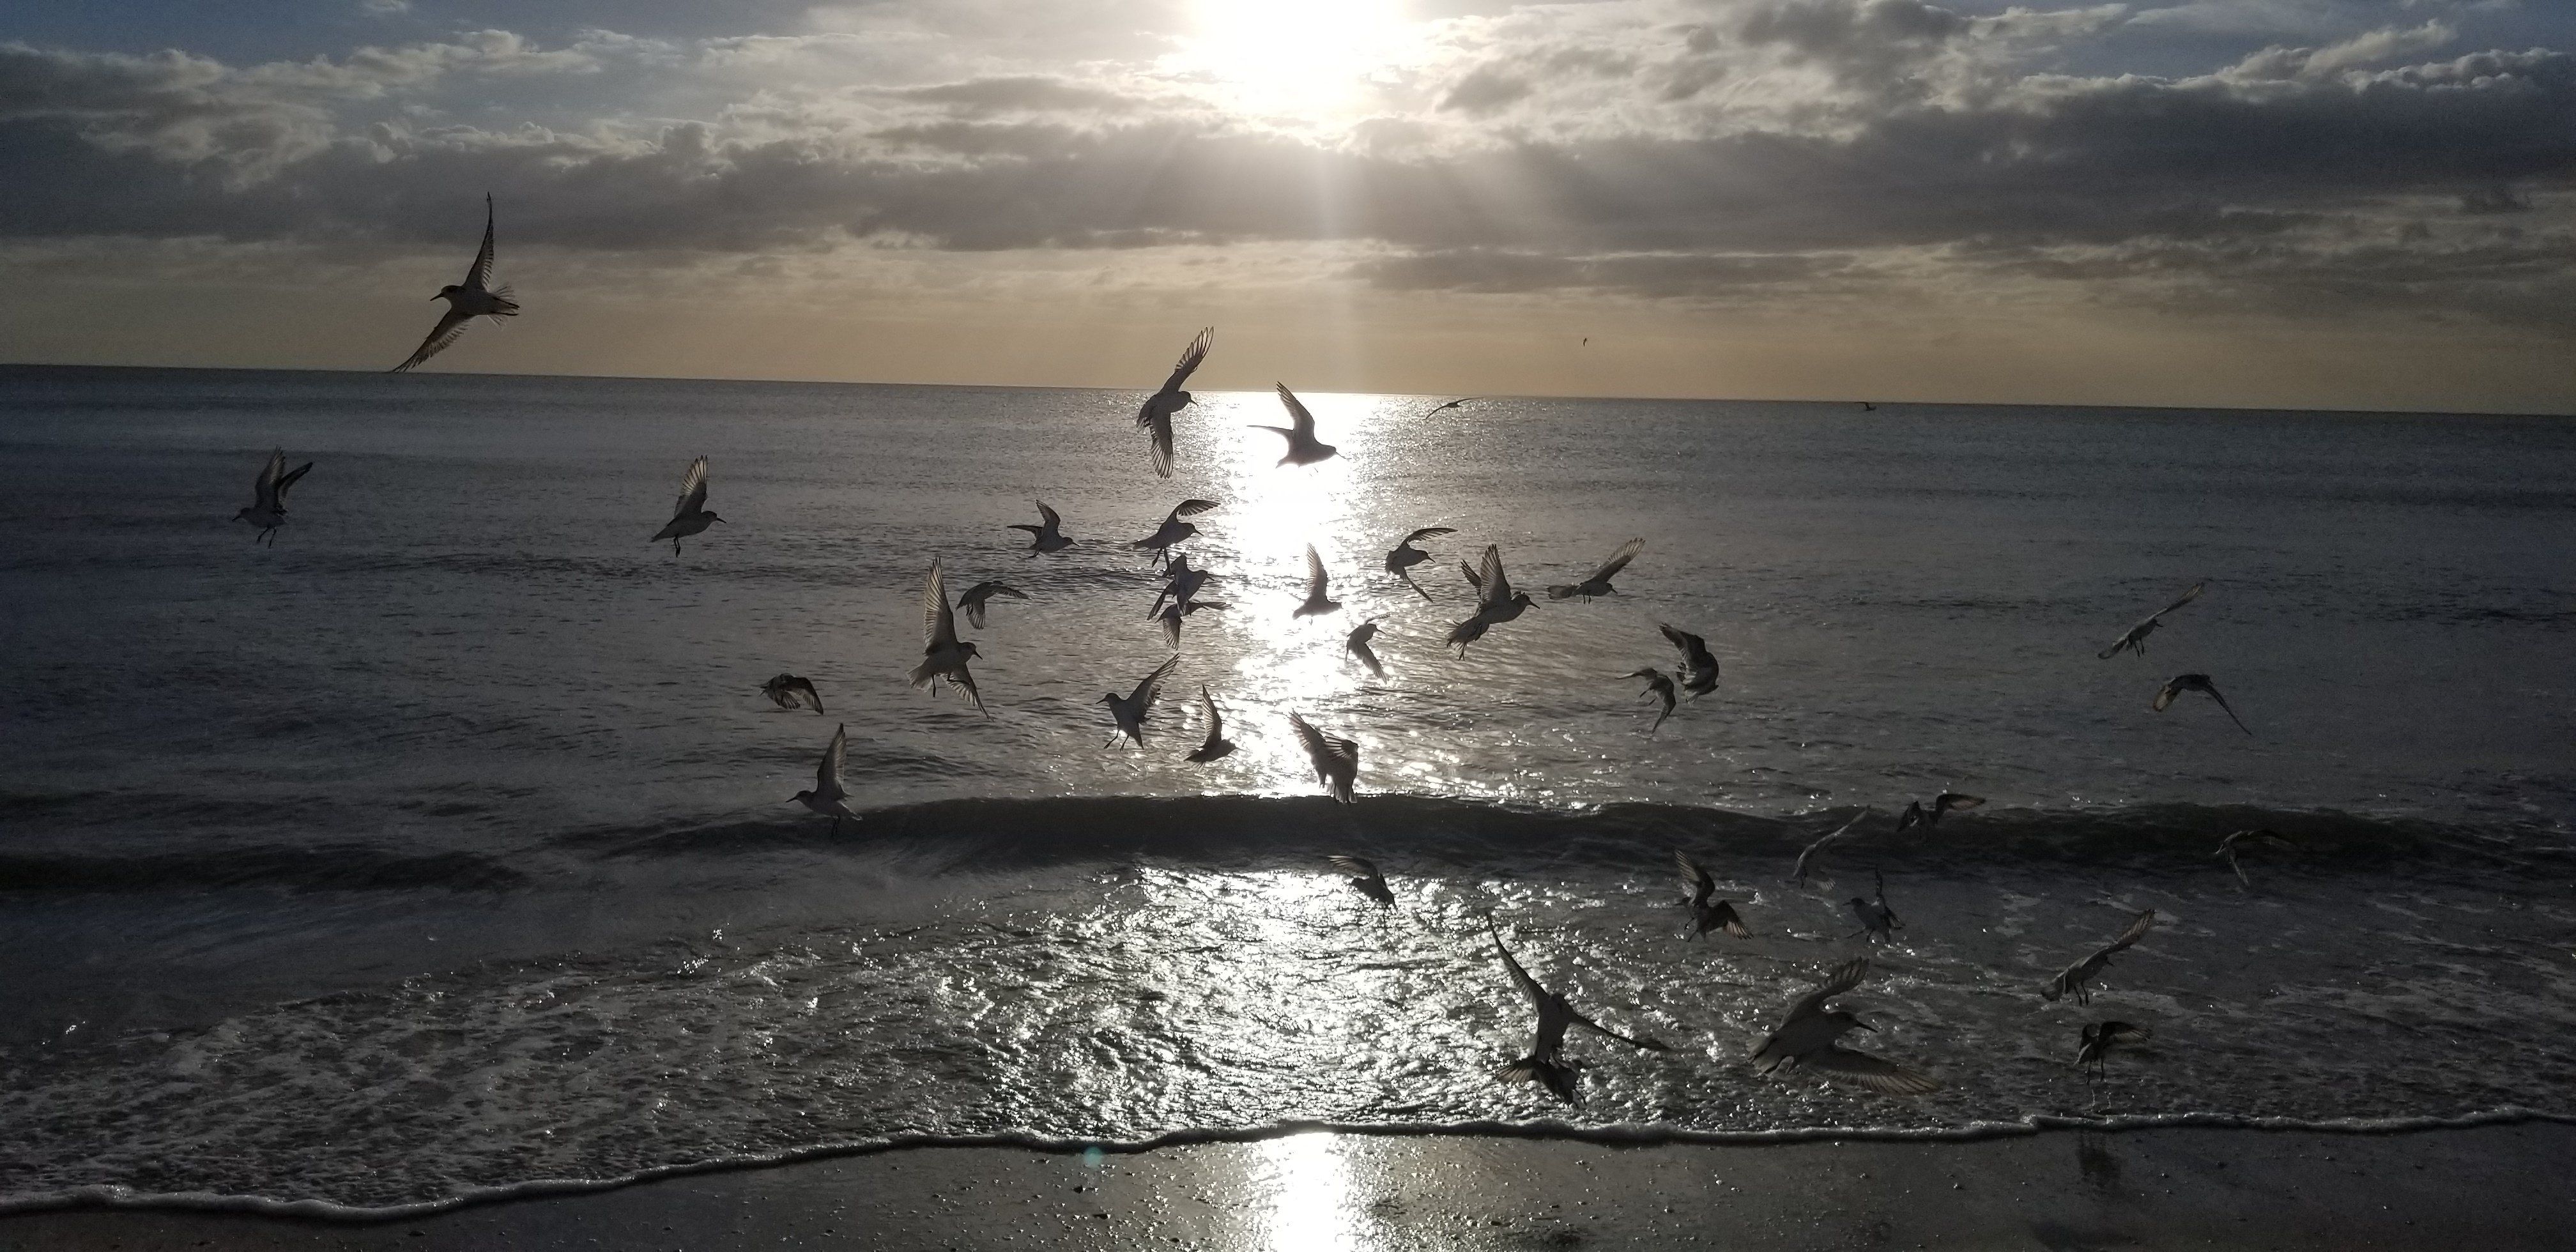 Bird Silhouettes In Front Of The Ocean